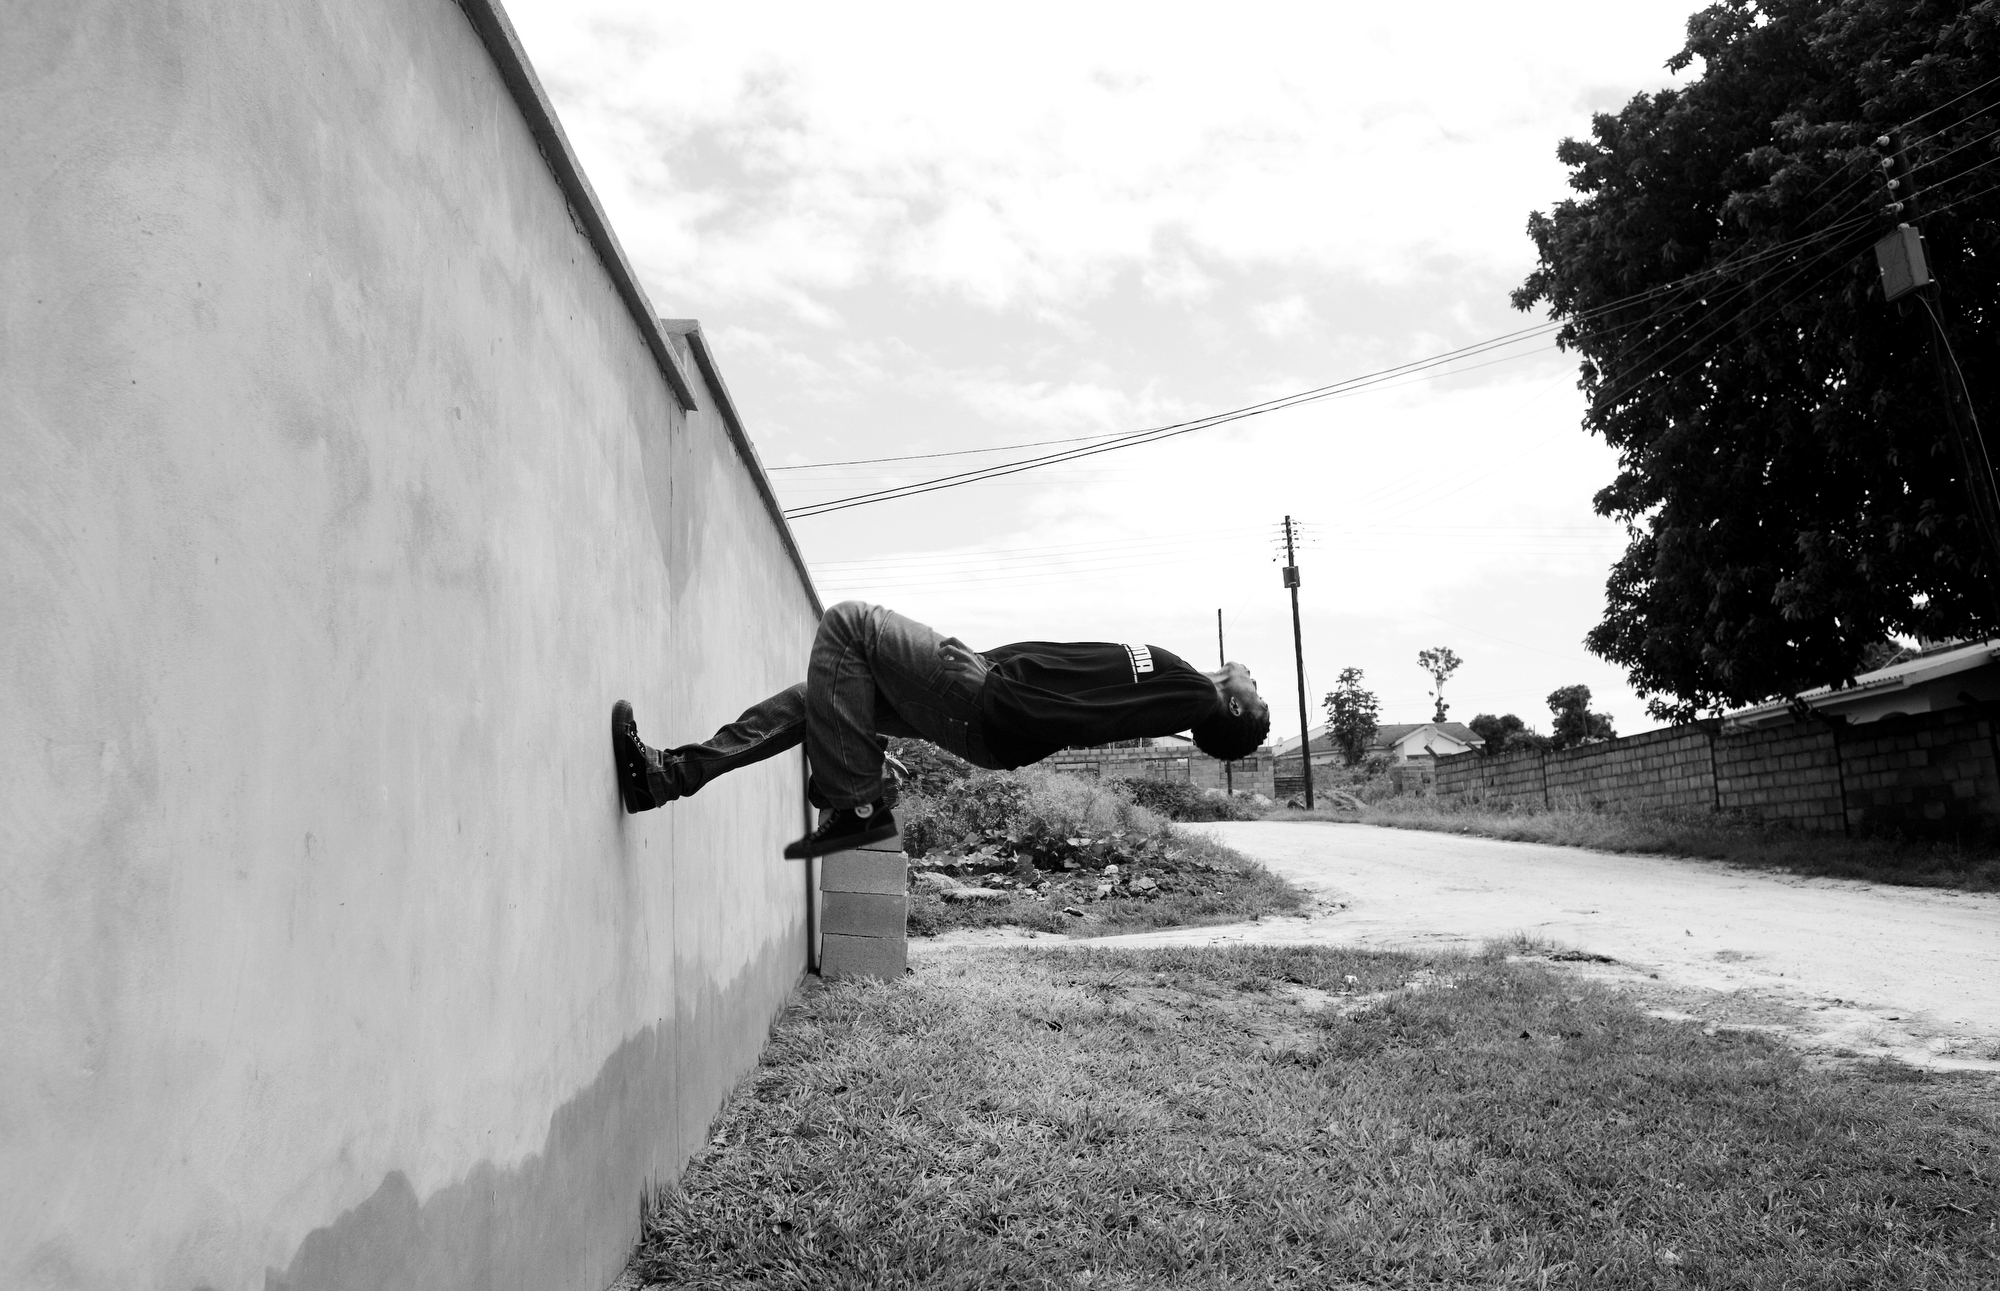 A teenager practices a flip off a wall in an urban neighborhood of eSwatini.